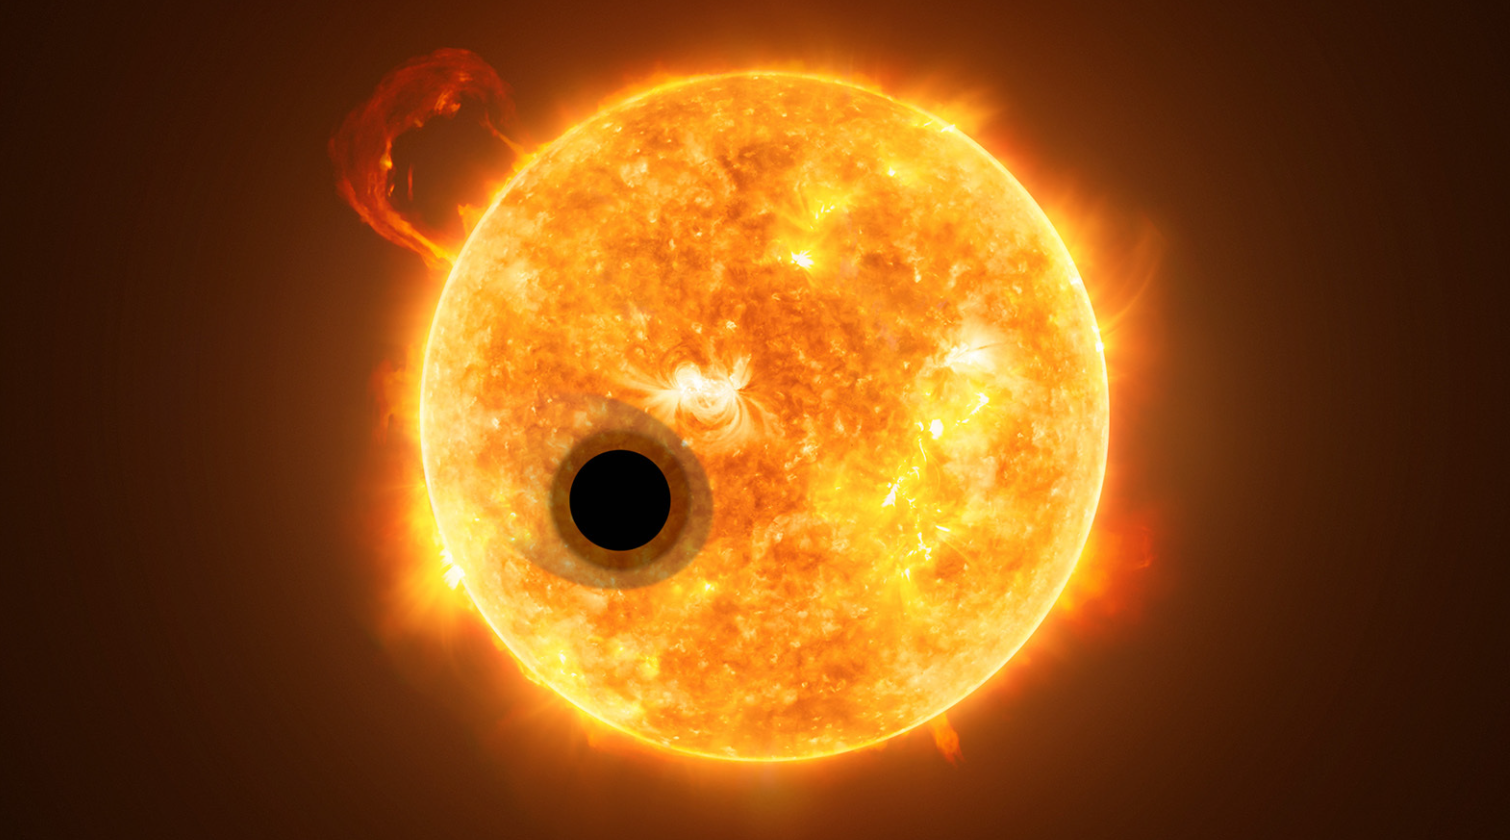 an exoplanet transiting in front of its star